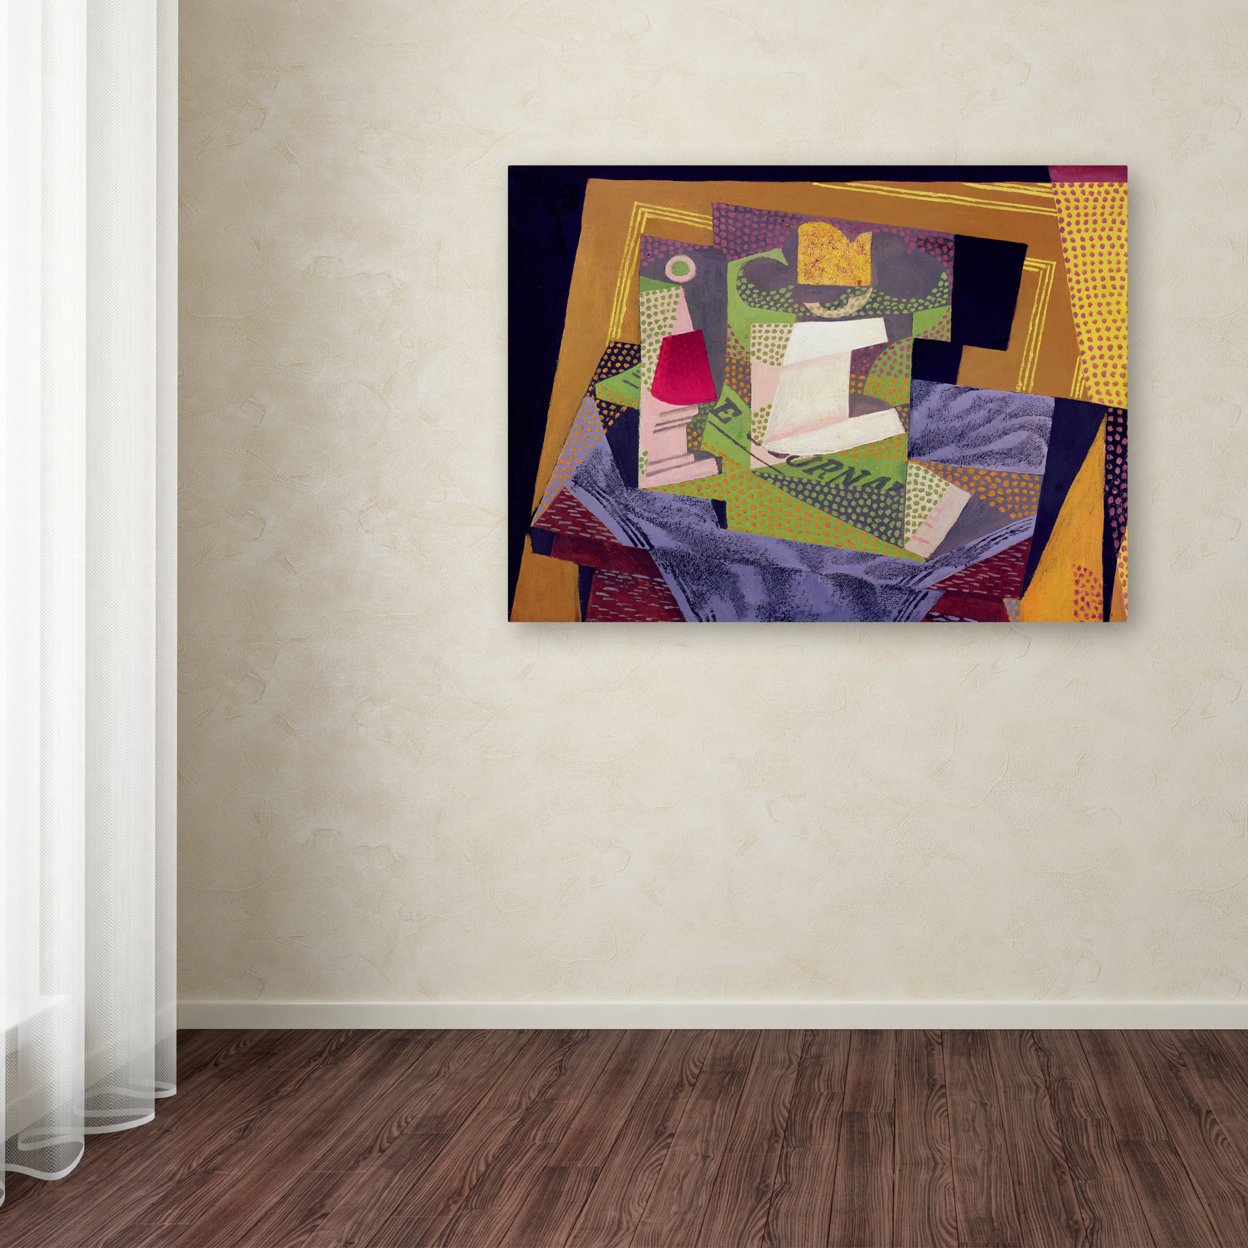 Juan Gris 'Composition On A Table 1916' Canvas Wall Art 35 X 47 Inches